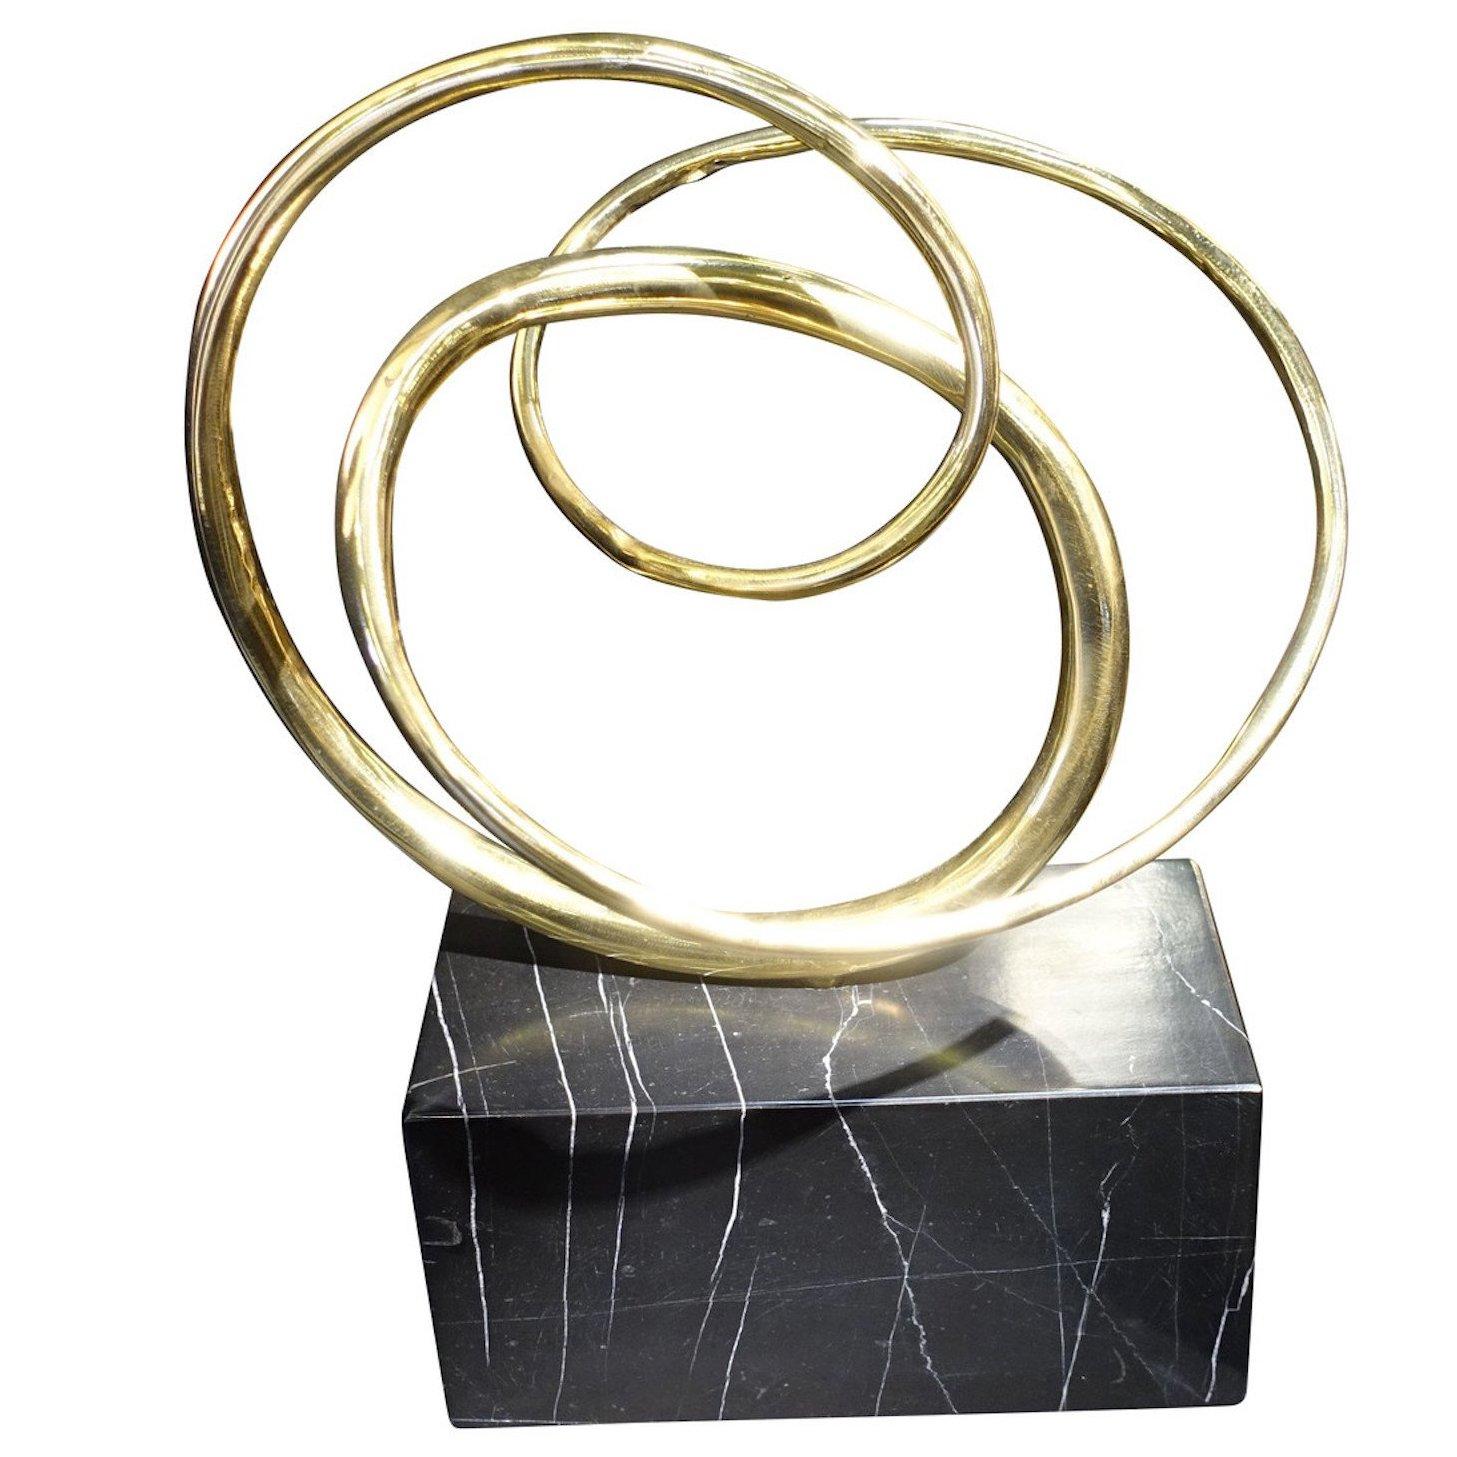 Contemporary German three bronze interlocking rings on black marble stand sculpture.
Moves to show different positions.
Stand measures 8 inches x 4 inches.

 